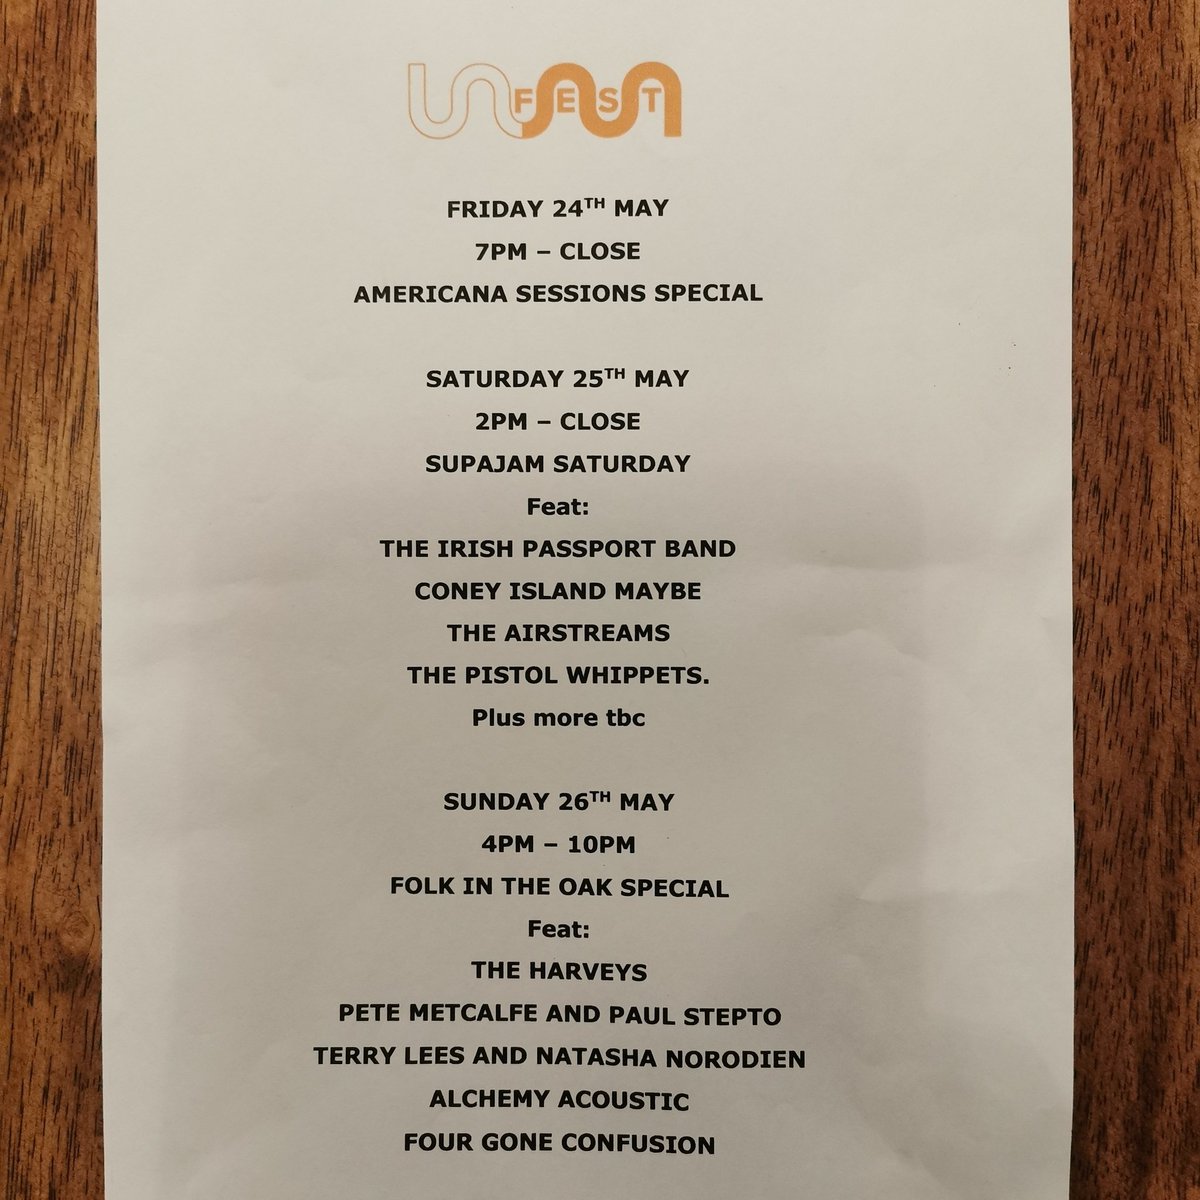 #unfest at #theroyaloaktw, bank holiday weekend.

#livemusic #twmusic #localmusic #twpubs #twevents